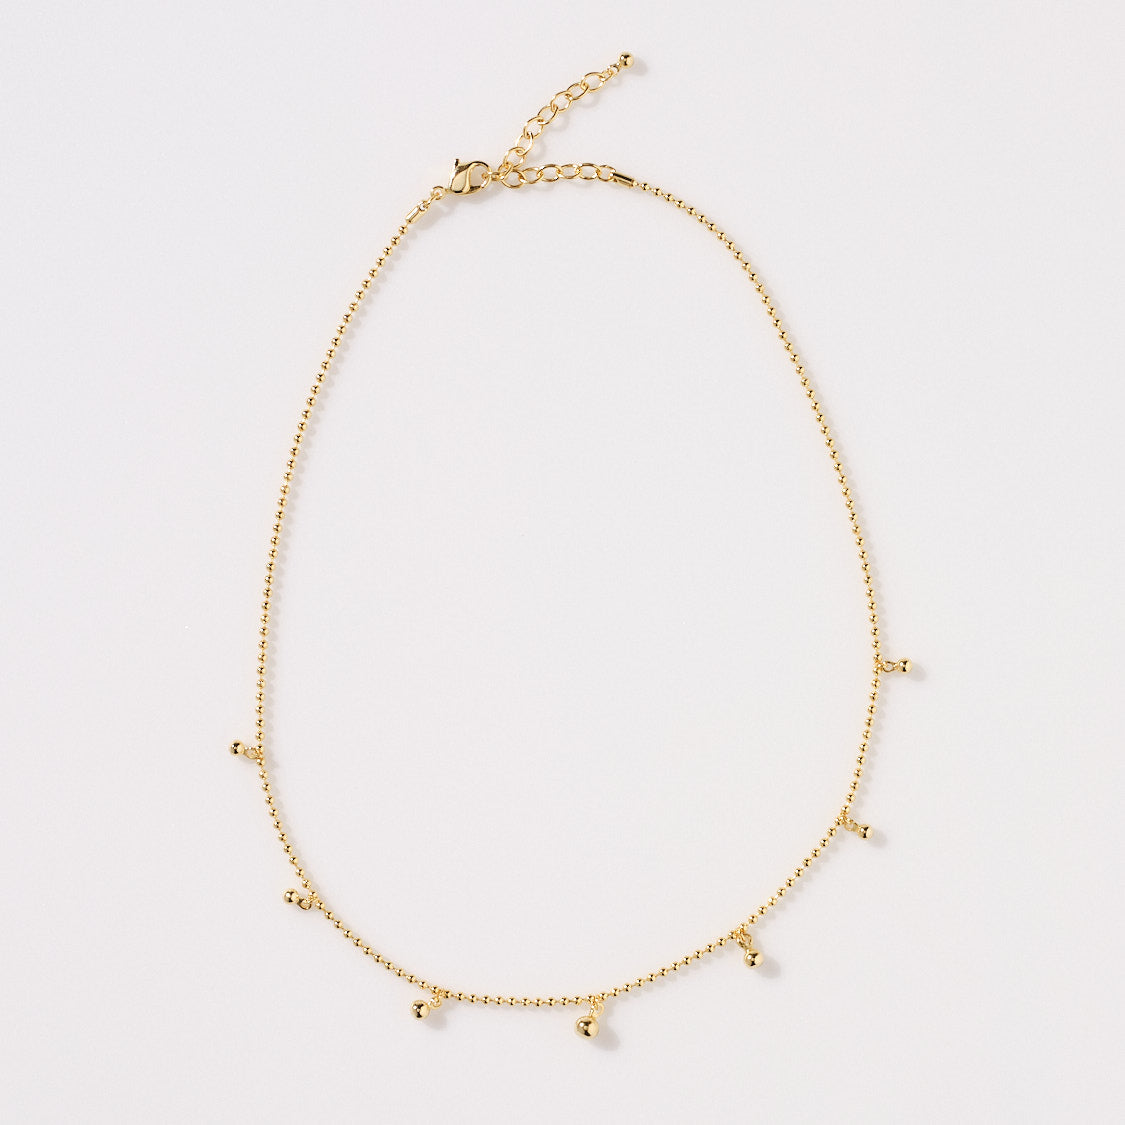 Steph Shaker Necklace in Gold